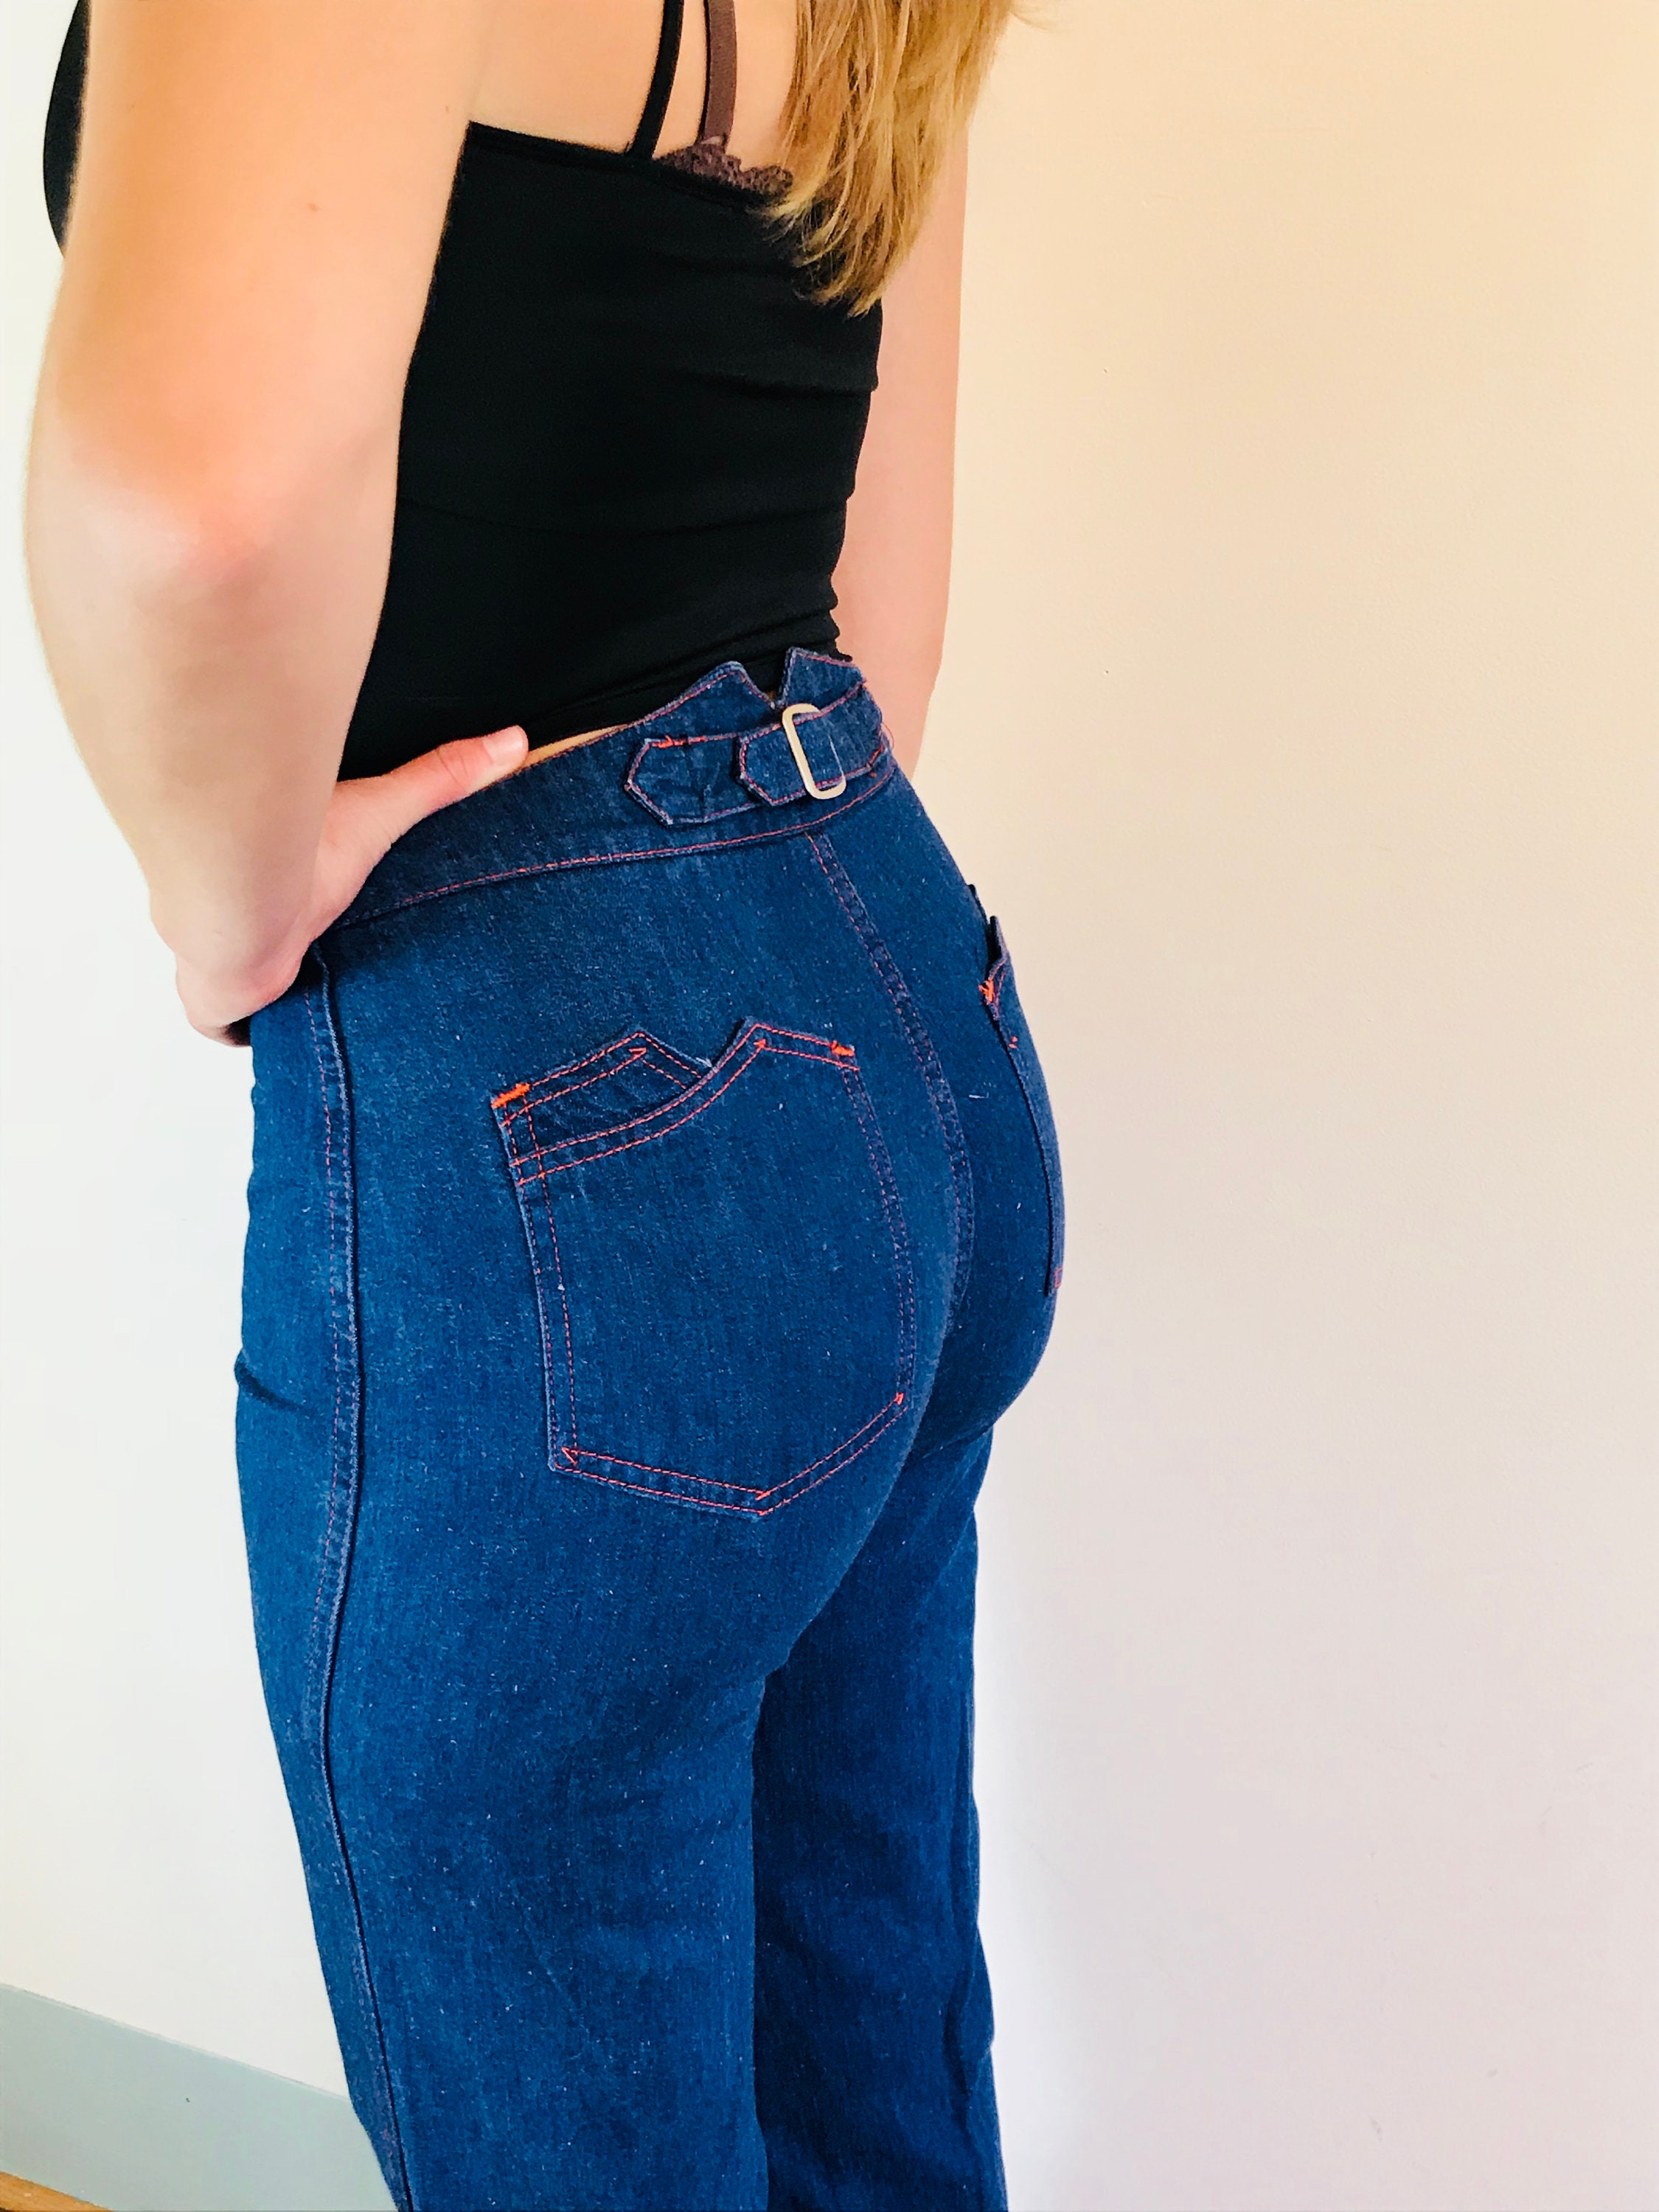 Vintage 70s Jeans, Super High Waisted, MONTGOMERY WARD, Tight Disco Pants, 1970s  Blue Jeans, Dark Wash Denim, High rise jeans, Wedgie Jeans